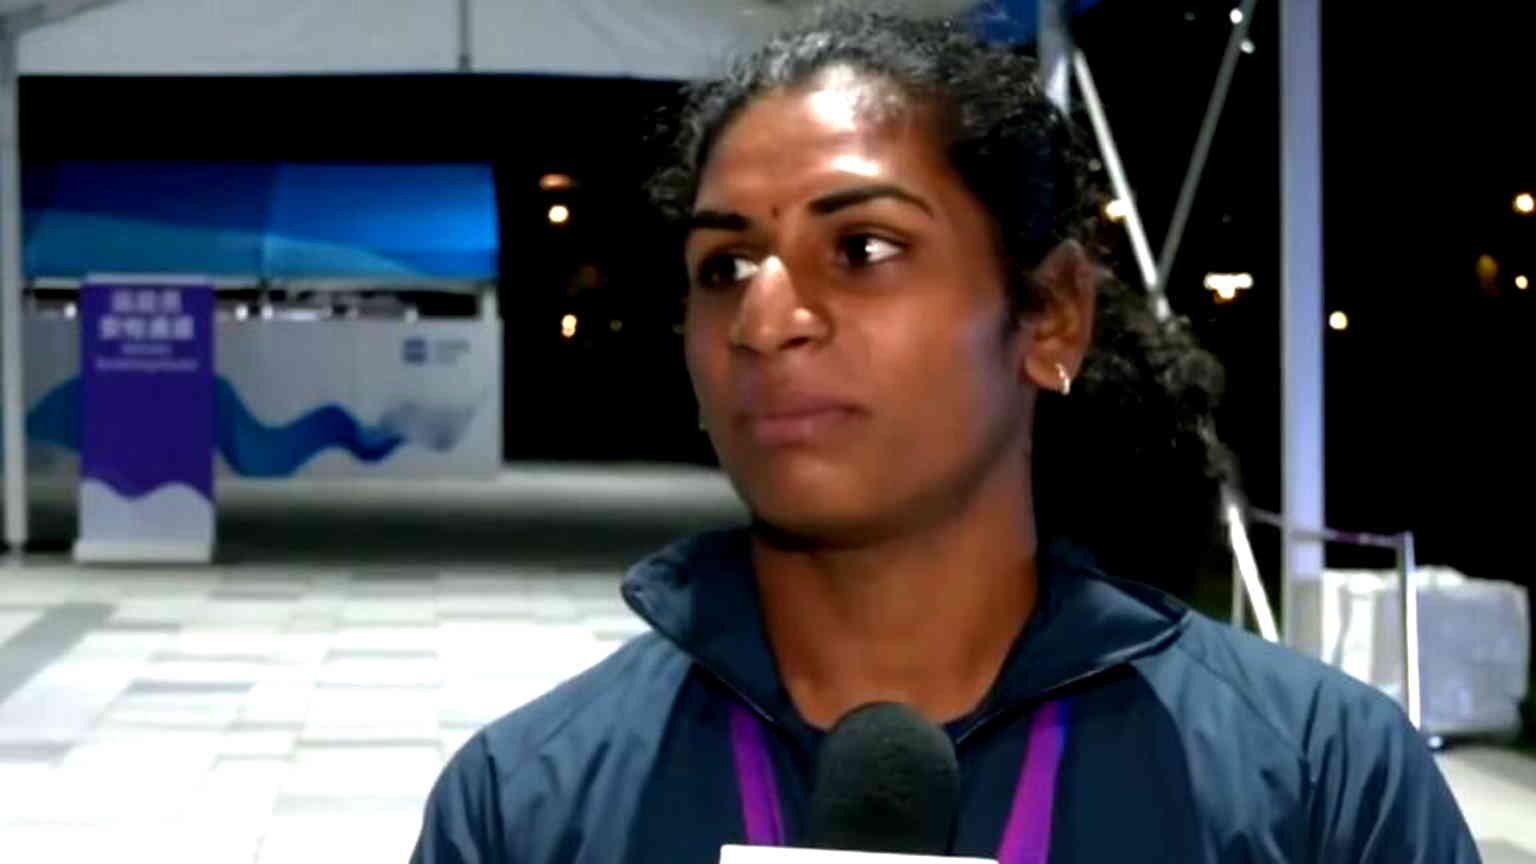 Asian Games: Indian athlete hits back at compatriot who accused her of being transgender